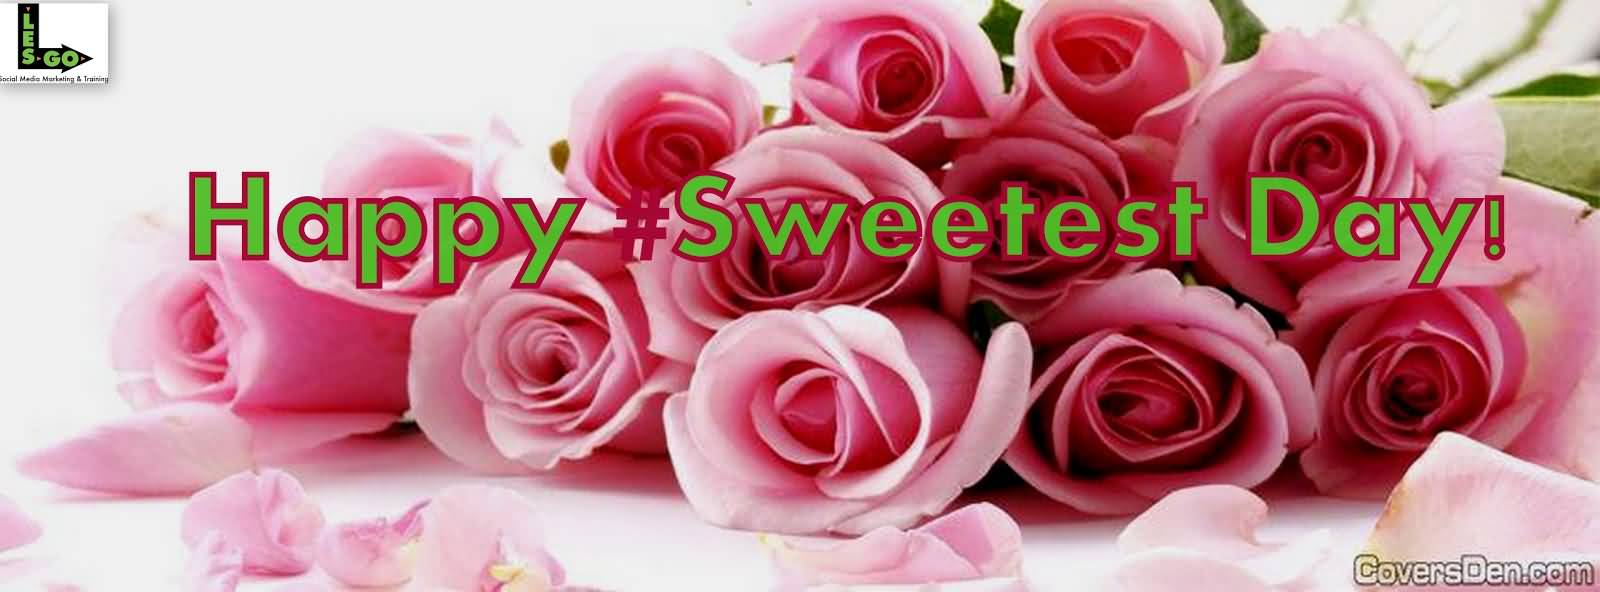 Happy Sweetest Day Rose Flowers Facebook Cover Picture